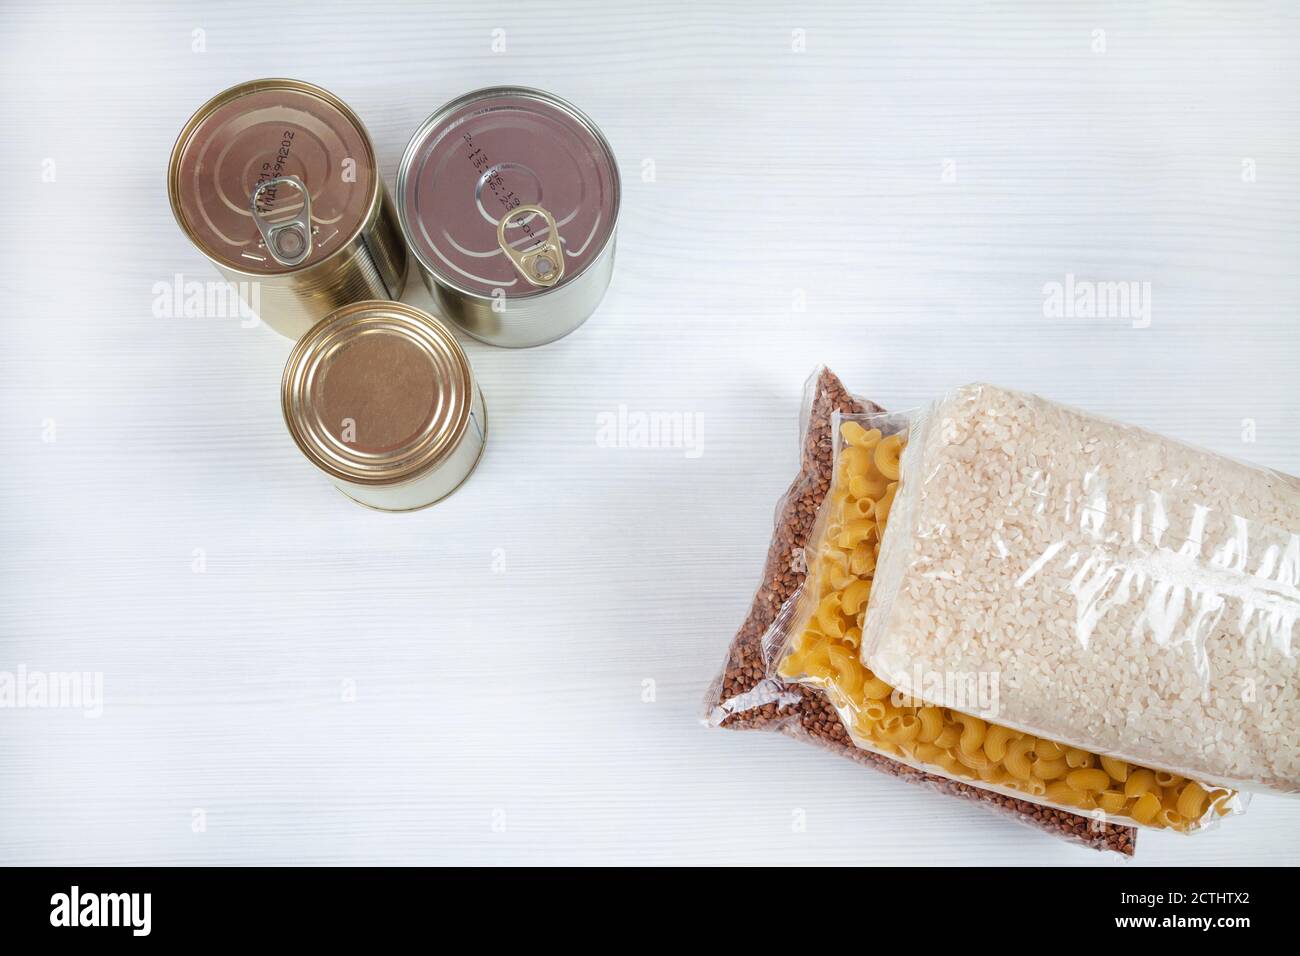 humanitarian assistance for poor and large families. Donation during crisis. Tin cans, canned food, stew, buckwheat, rice, pasta in transparent bags Stock Photo